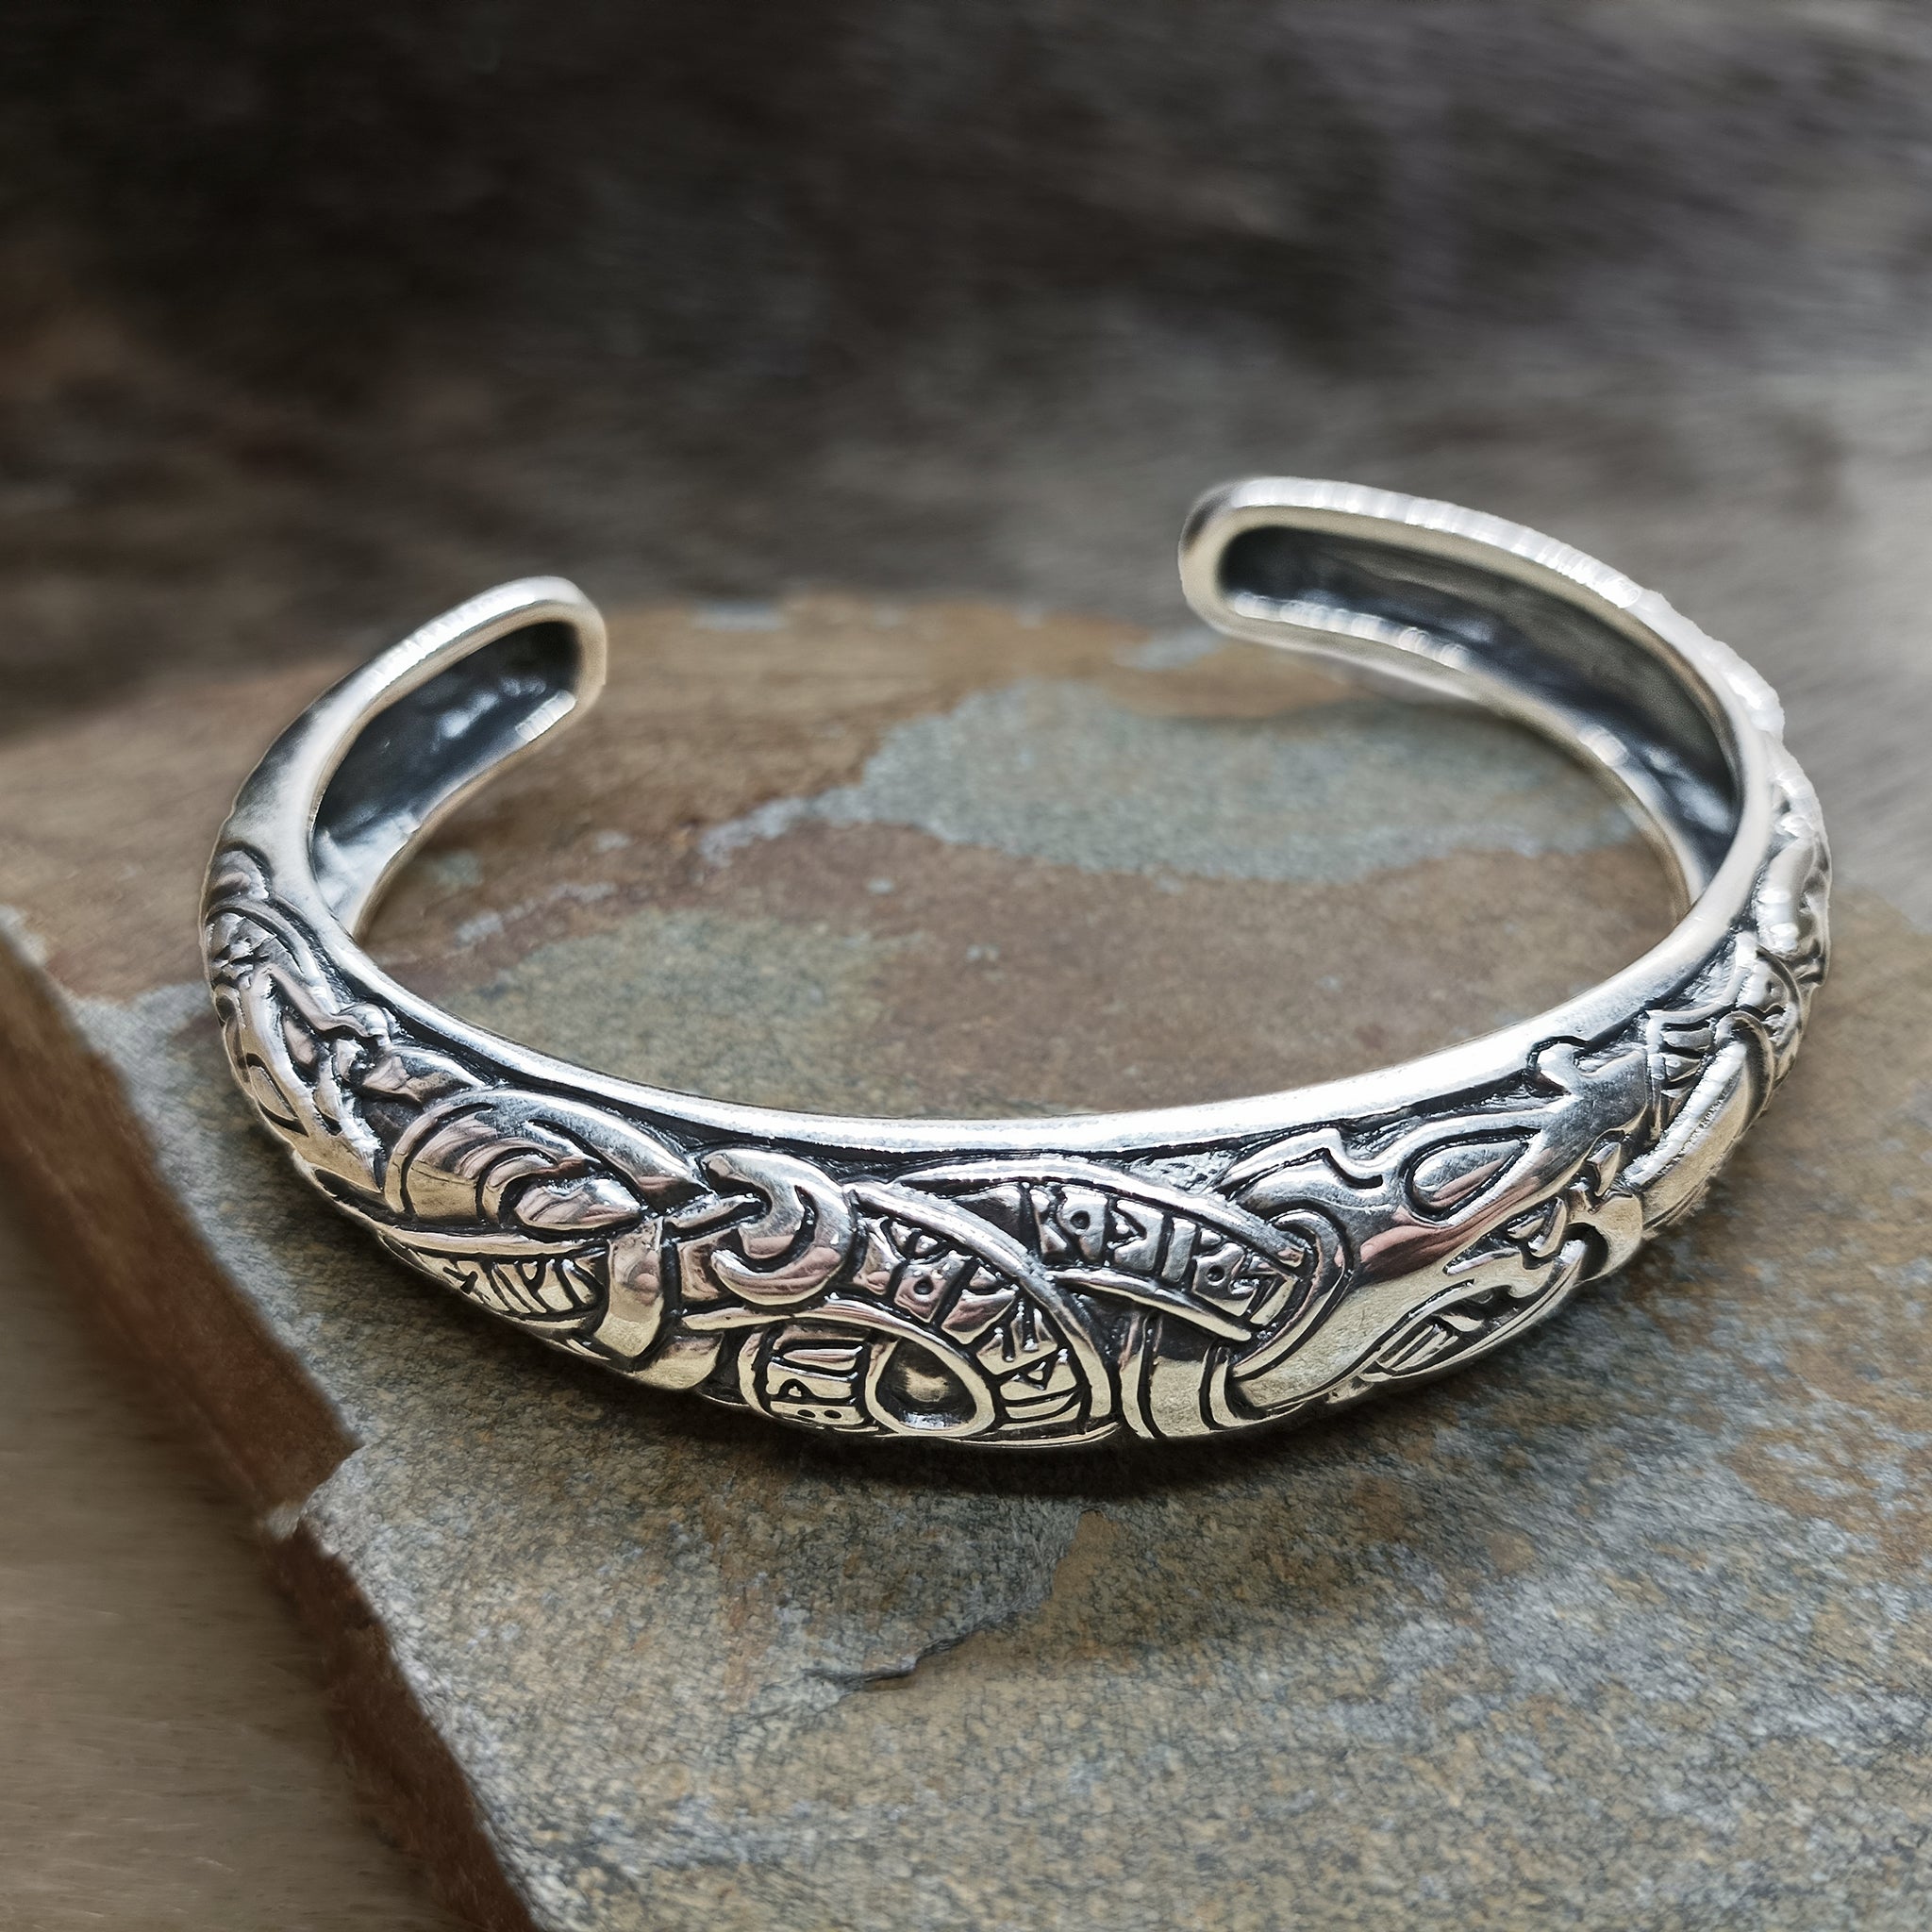 Silver Runic Viking Bracelet / Arm Ring on Rock - Above Angle View